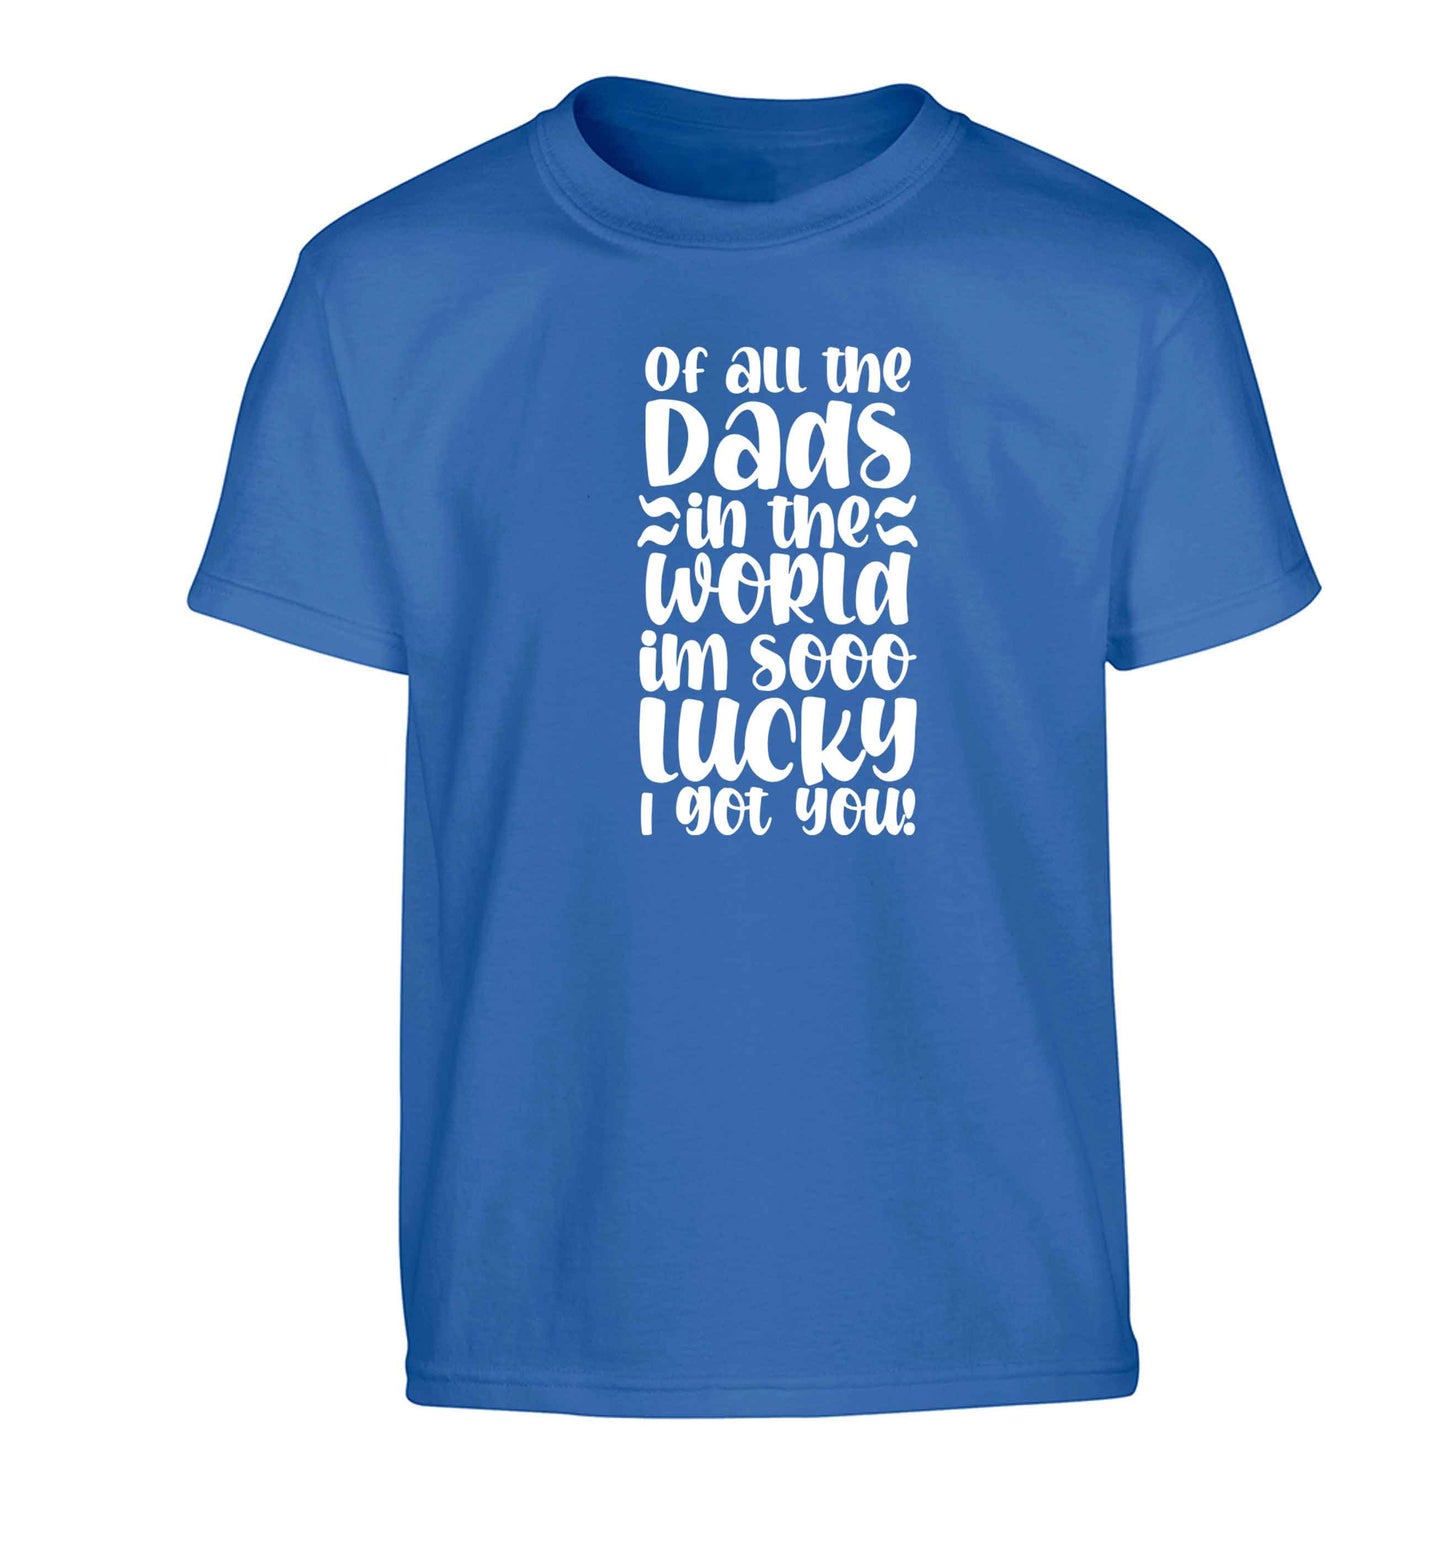 I'm as lucky as can be the worlds greatest dad belongs to me! Children's blue Tshirt 12-13 Years